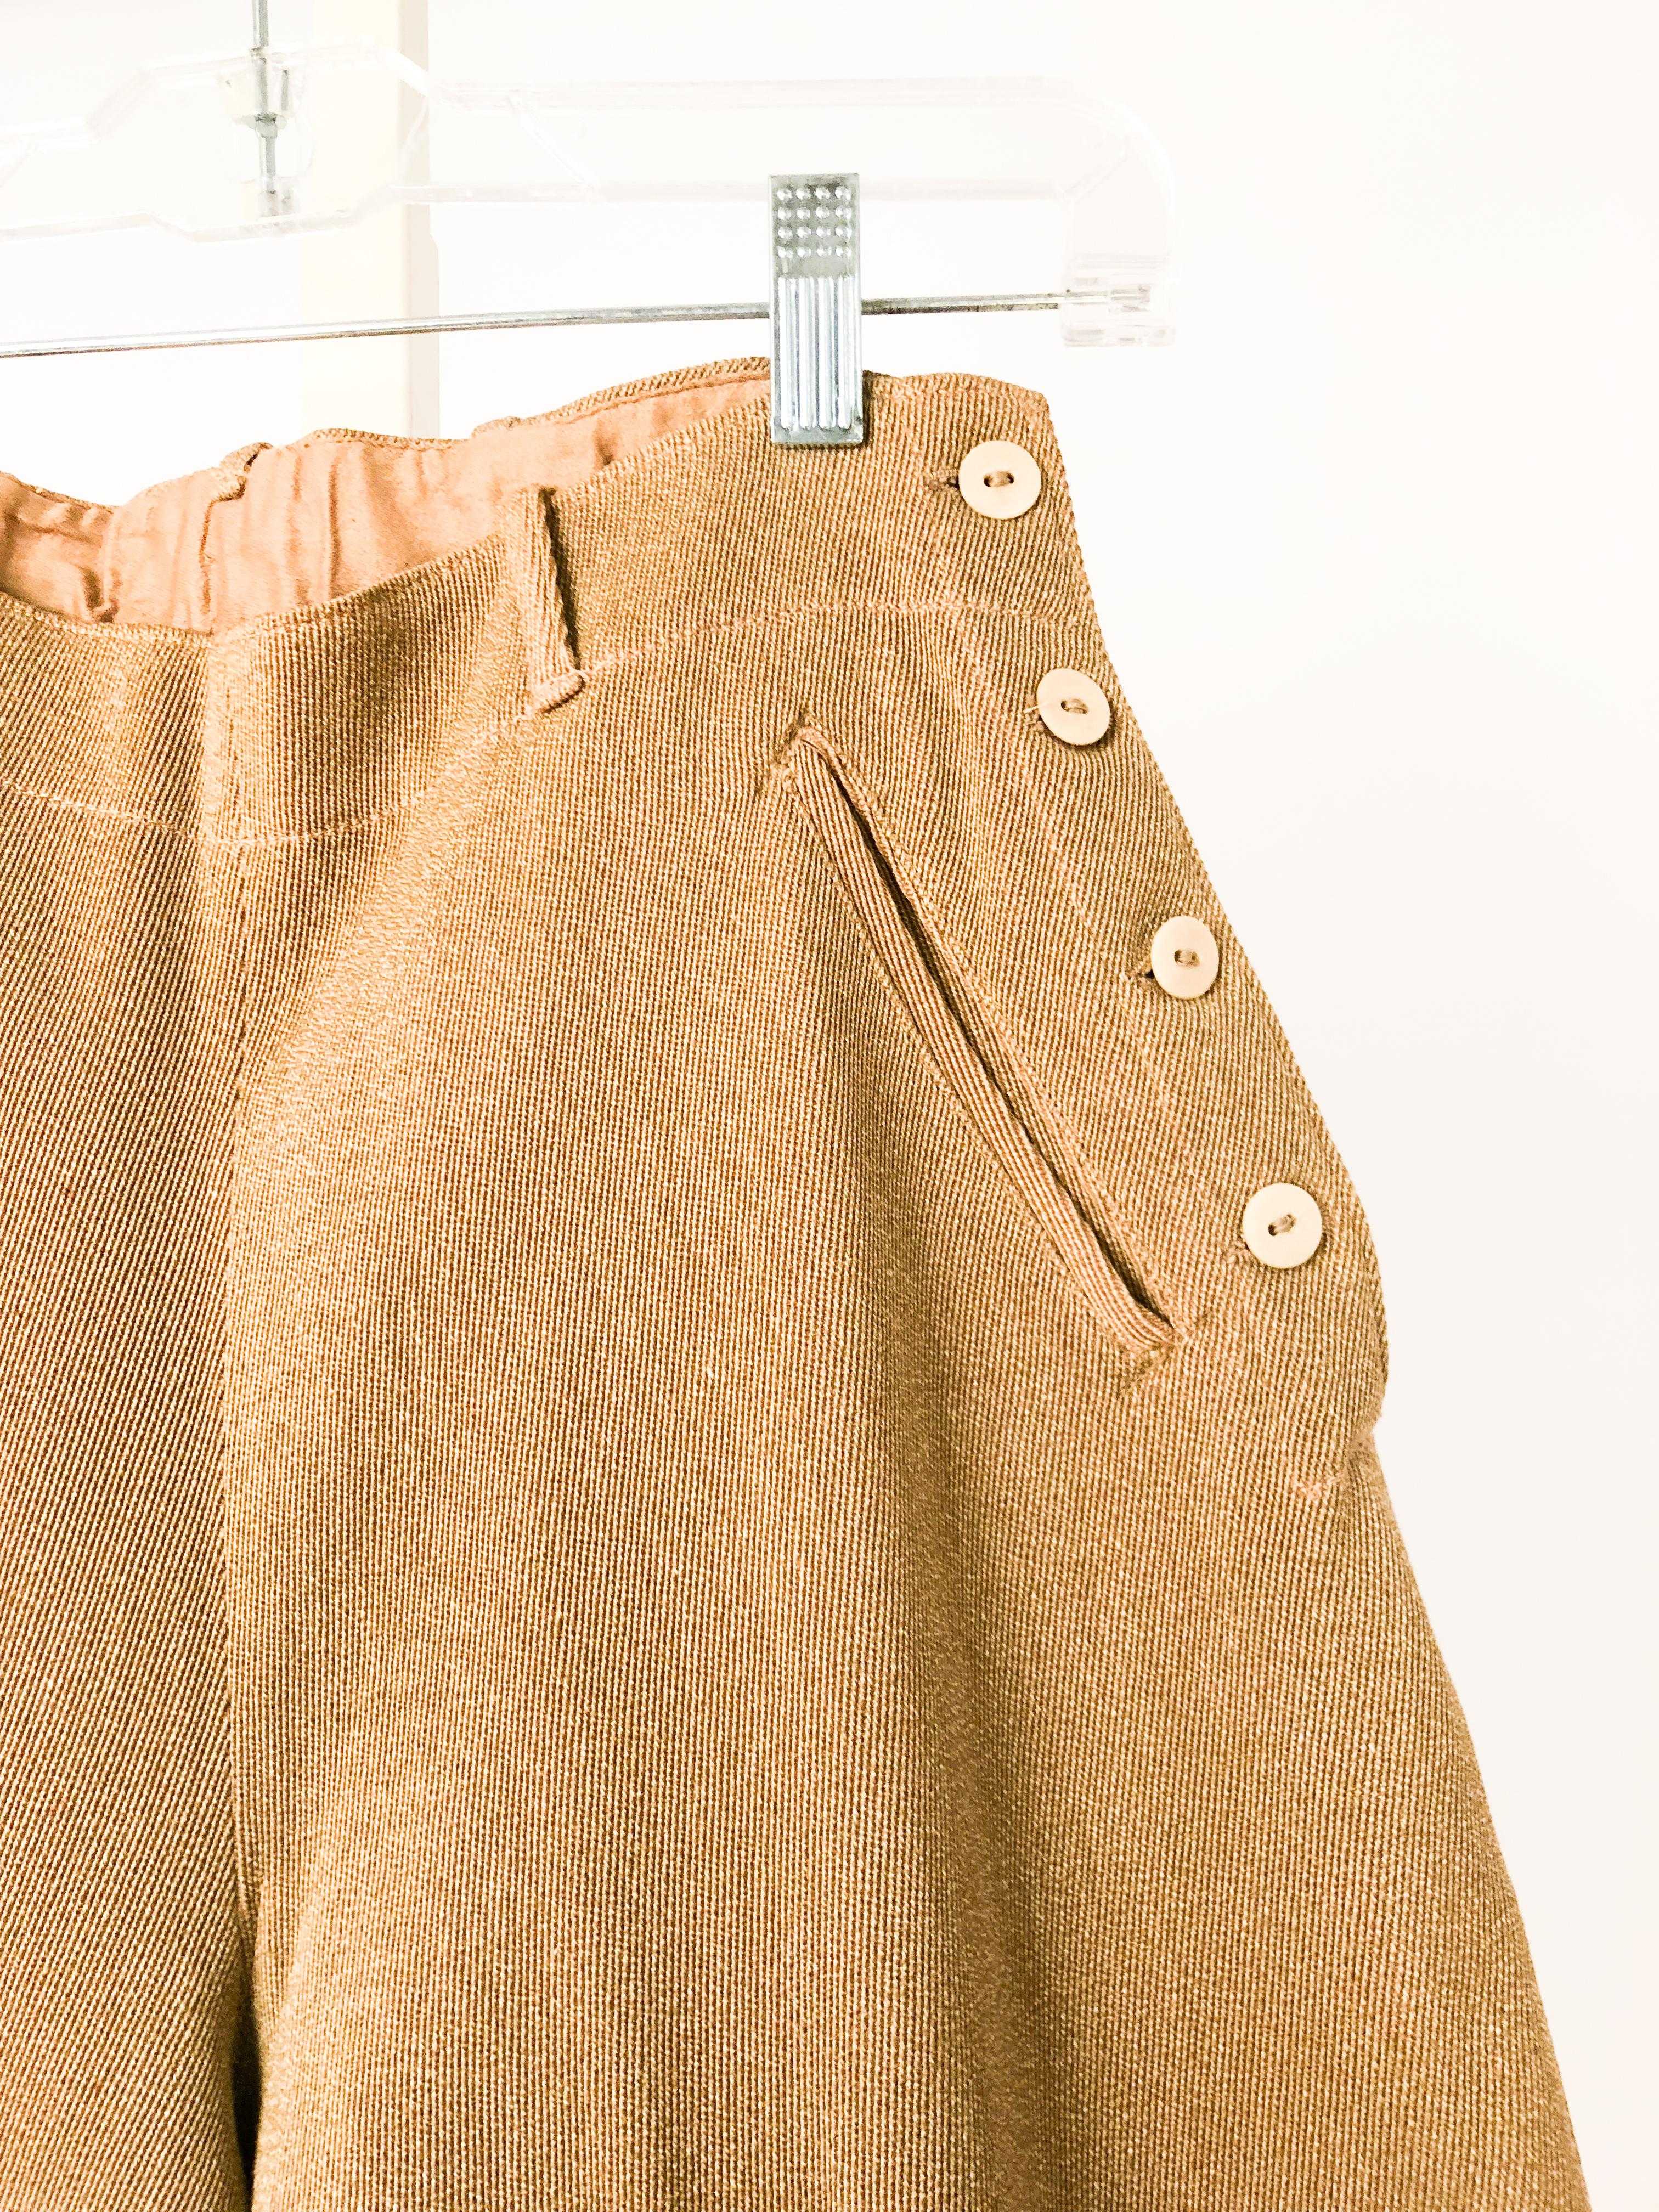 Tan with flecked color texture jodhpurs made of a heavy twill and applied suede grip pads, finished cuffs, sturup buttons, and celluloid buttons on the closure.